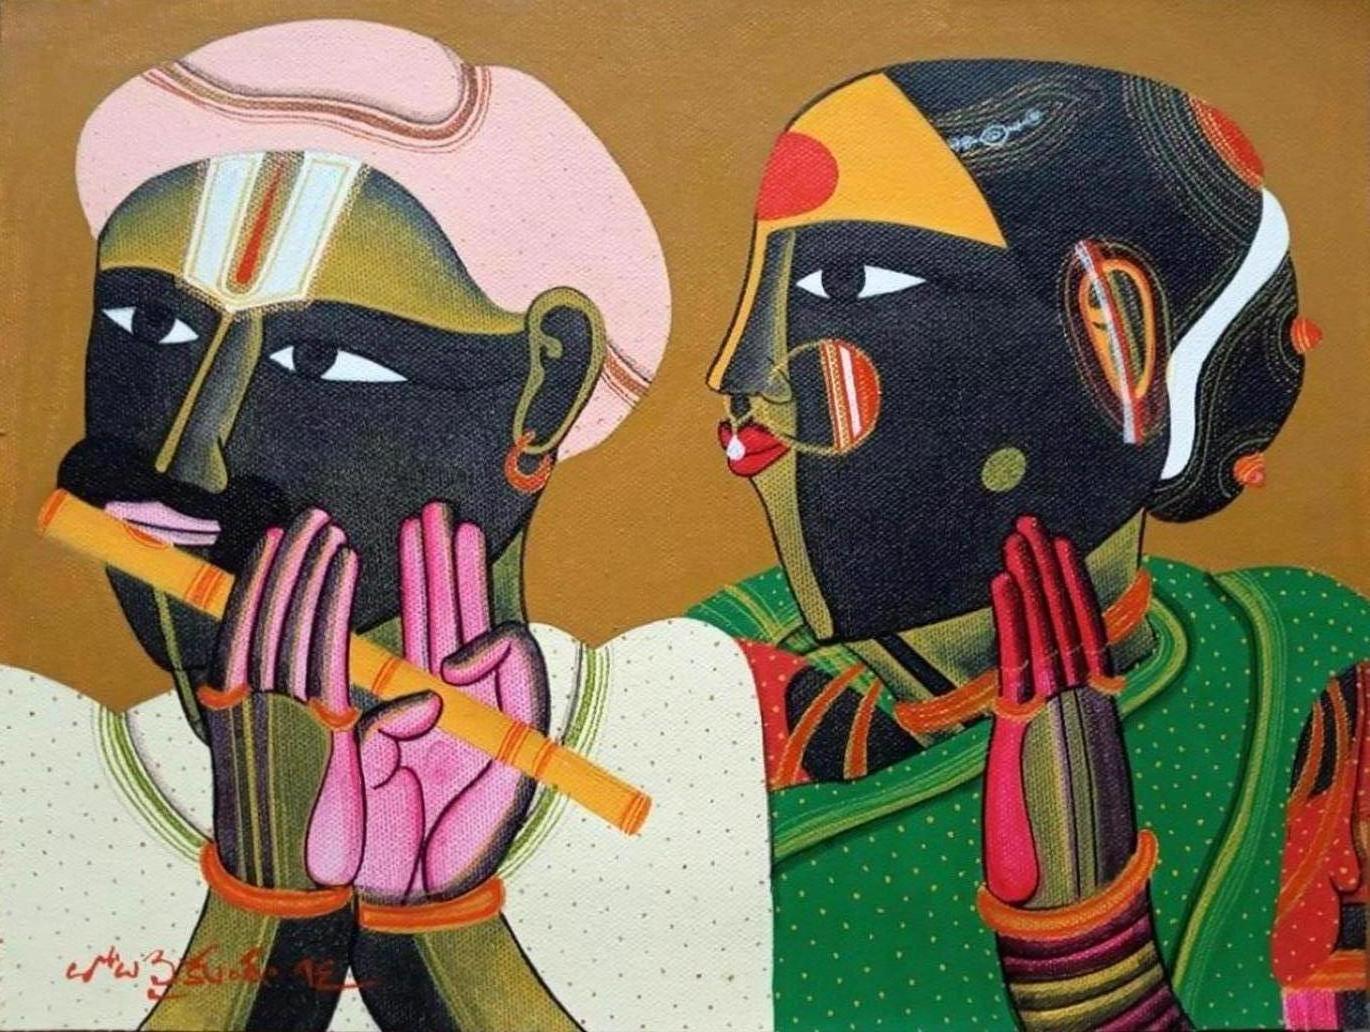 Thota Vaikuntam Figurative Painting - Telengana Couple, South Indian, Acrylic on Canvas, Red, Yellow, Green "In Stock"